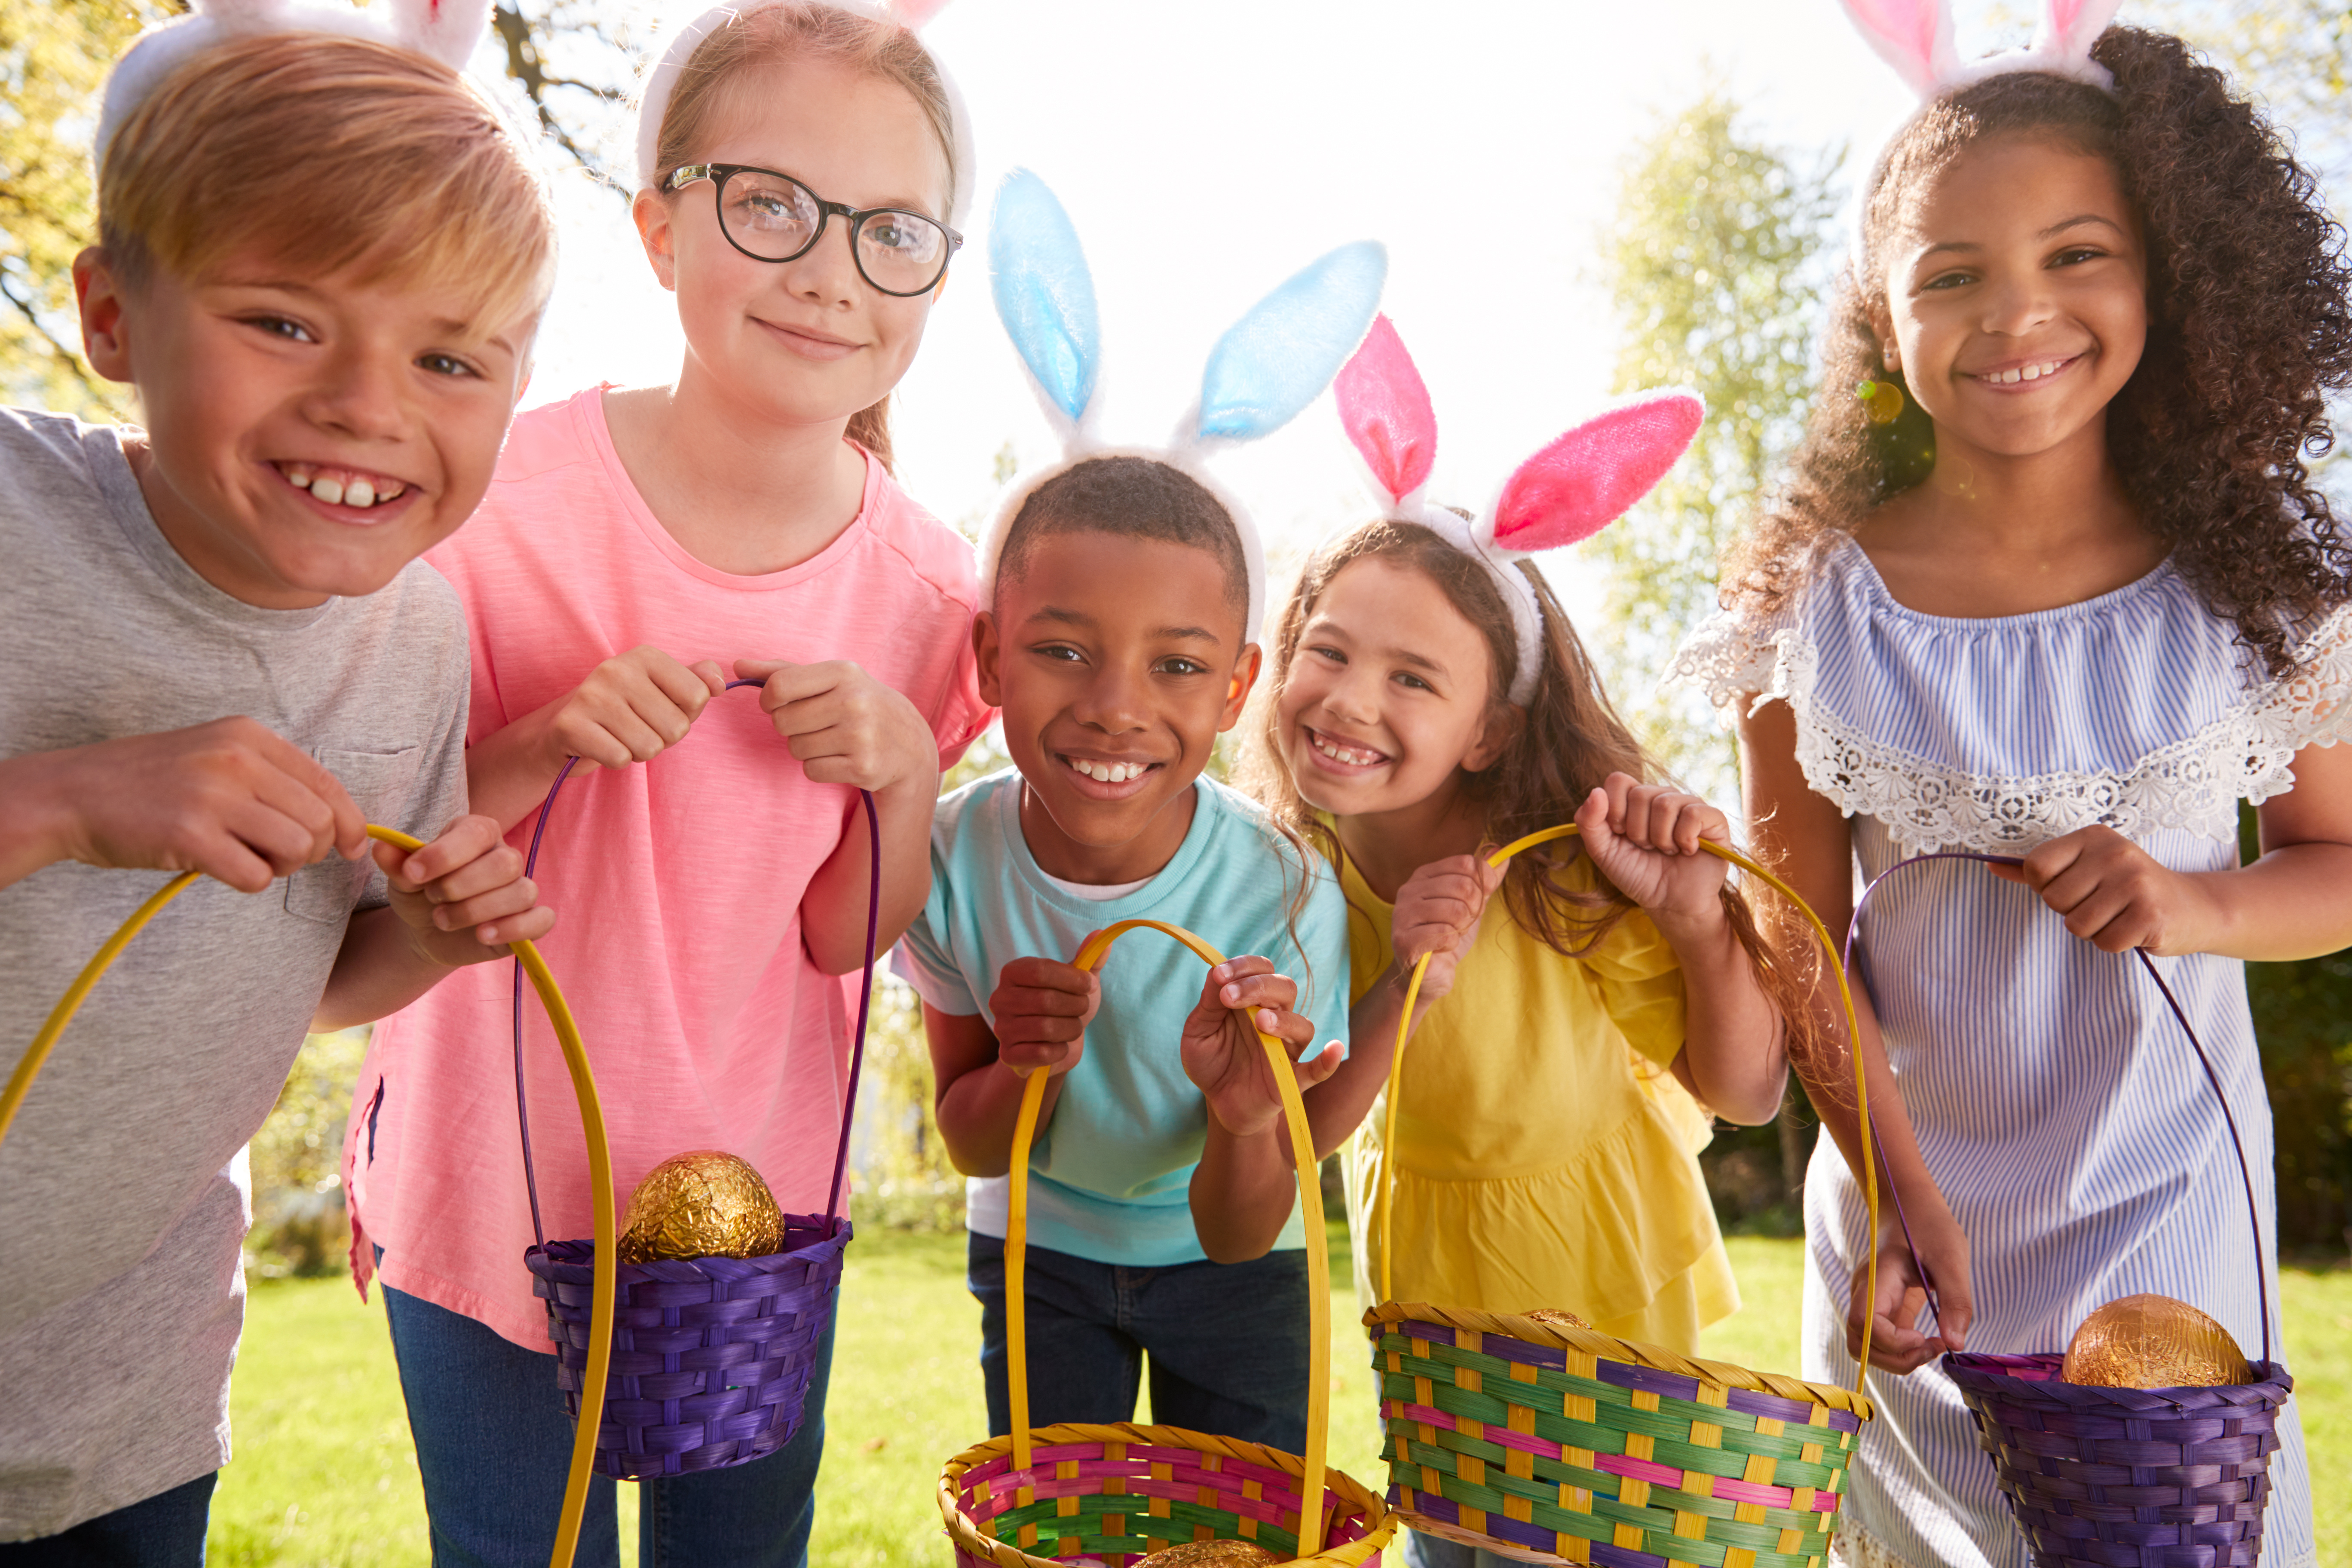 Join Us for an Egg-citing Easter Egg Hunt at Seven Meadows